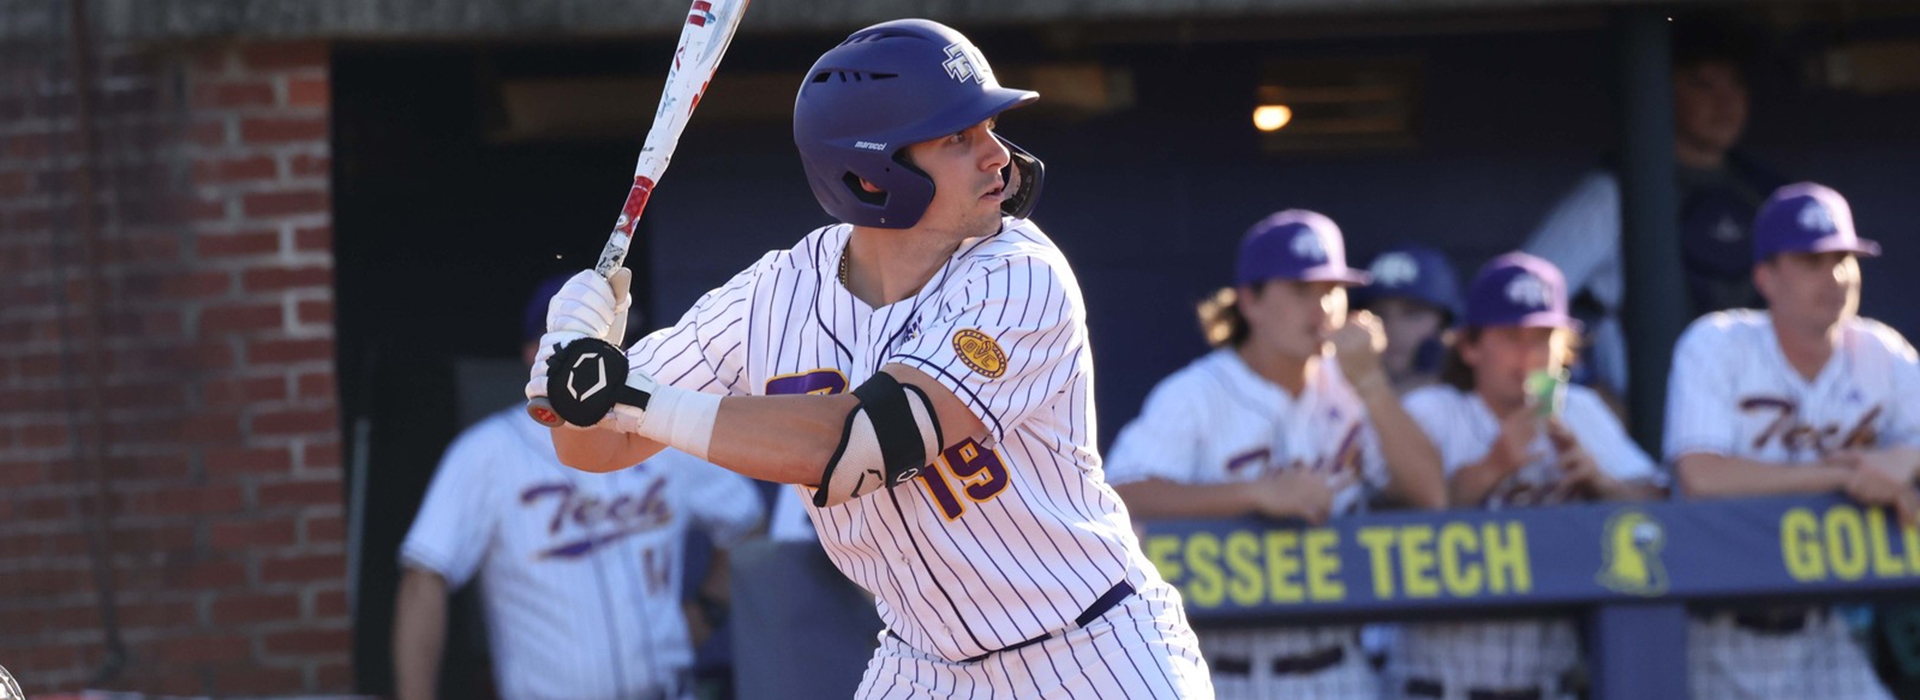 Tech to host North Alabama in weekend series starting Friday